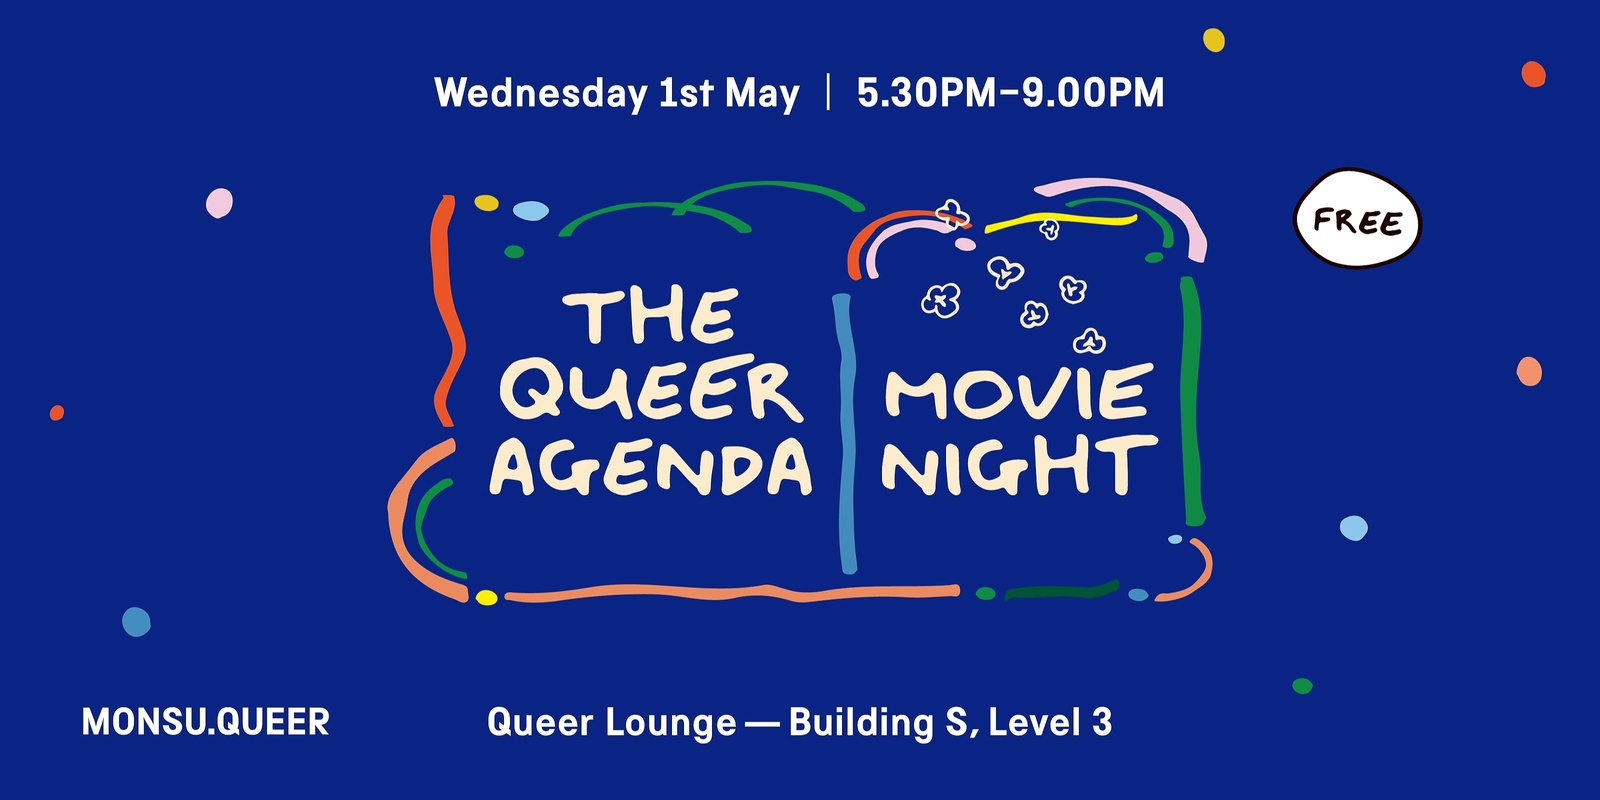 Banner image for The Queer Agenda - Queer Movie Night